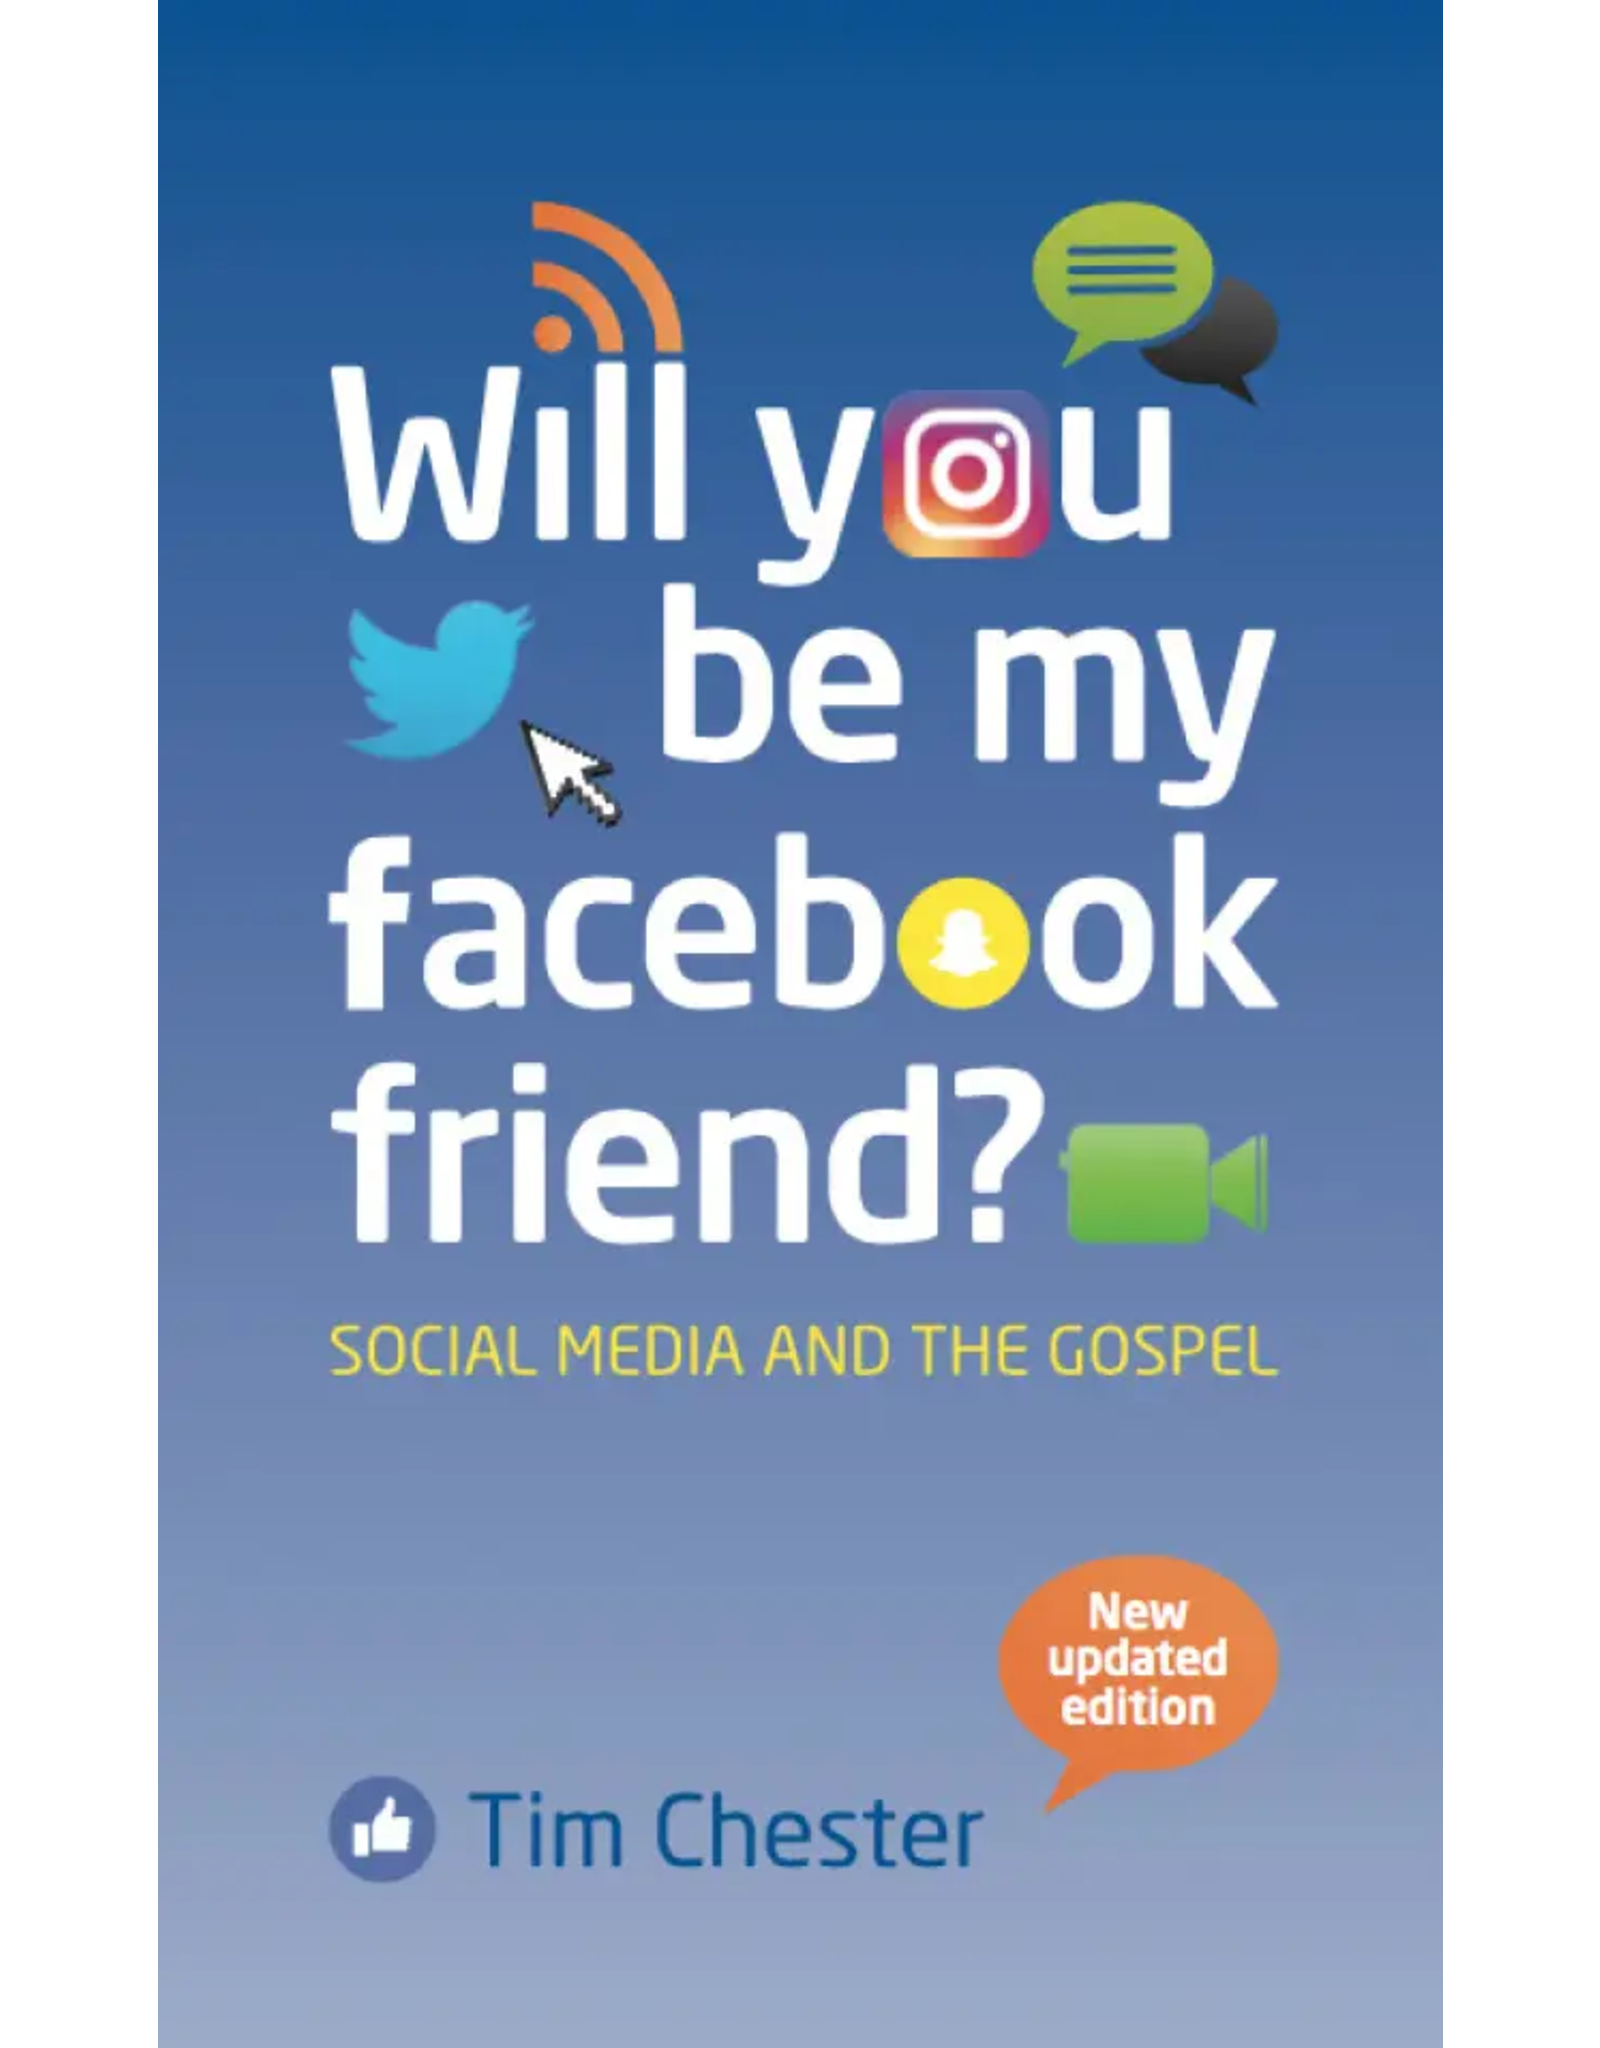 Tim Chester Will You Be My Facebook Friend?